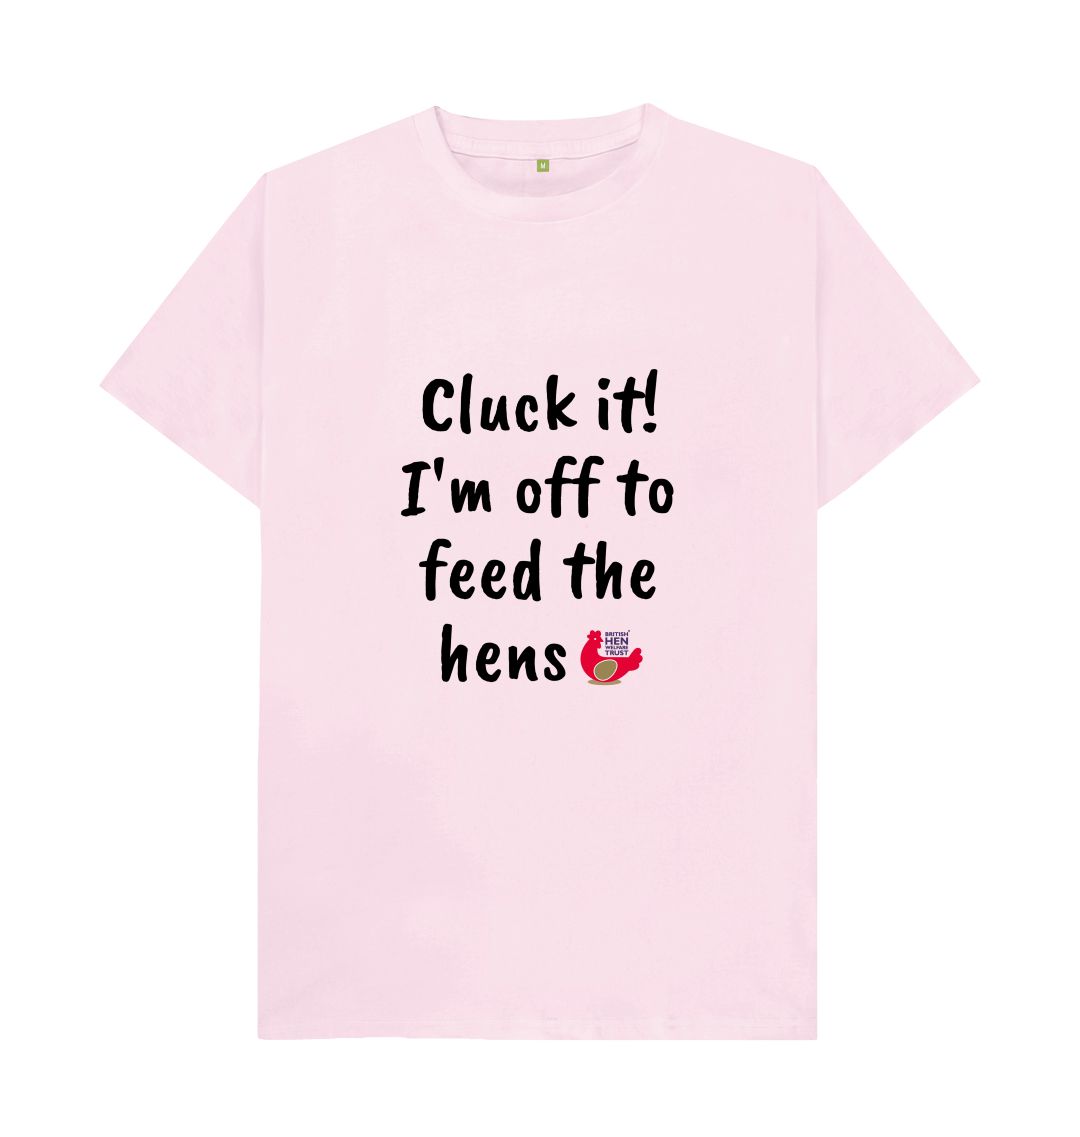 Pink Cluck it! I'm off to feed the hens Unisex T-shirt